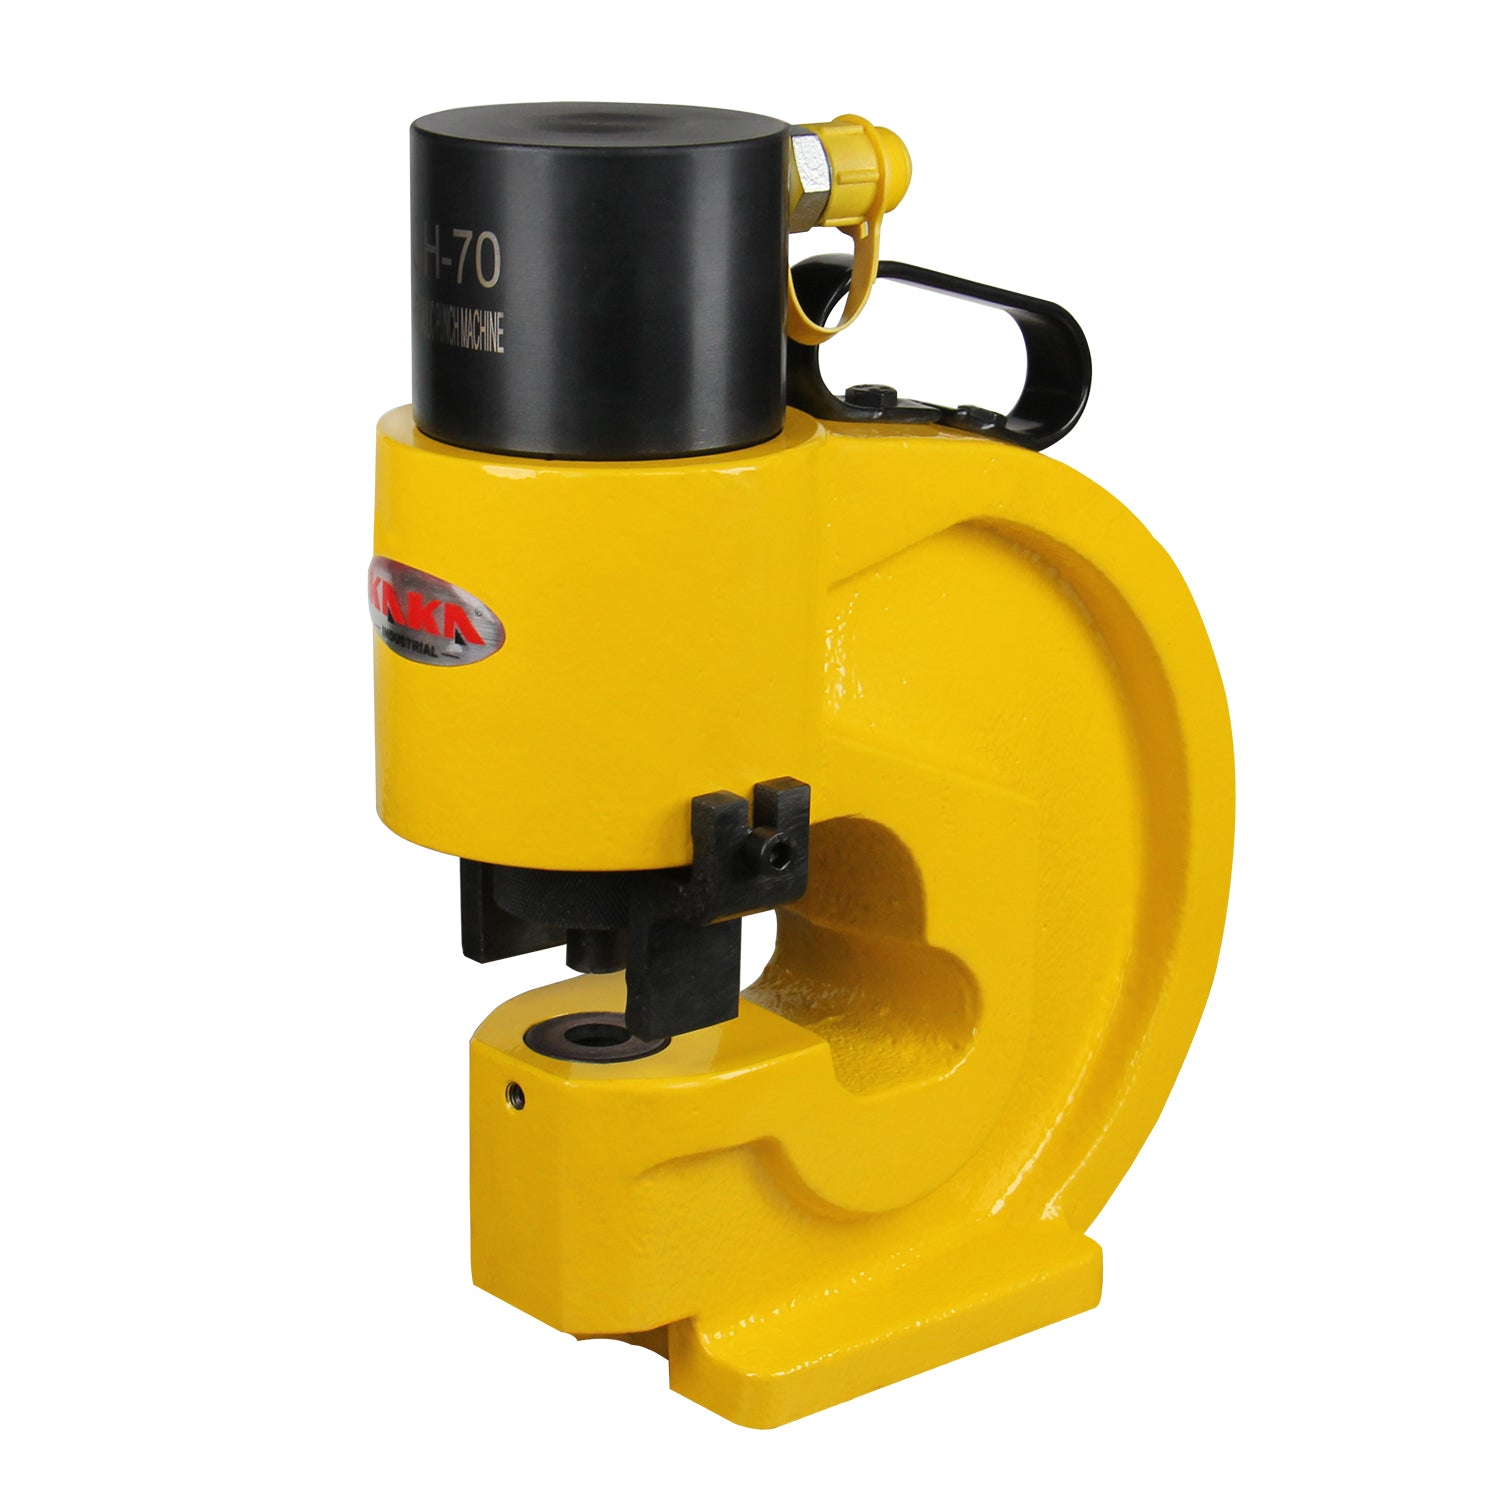 Kaka industrial CH-70 Hydraulic Hole Puncher for 35T Hole Digger Force  Puncher Smooth Hole Puncher for Iron Plate Copper Bar Aluminum Stainless  Steel